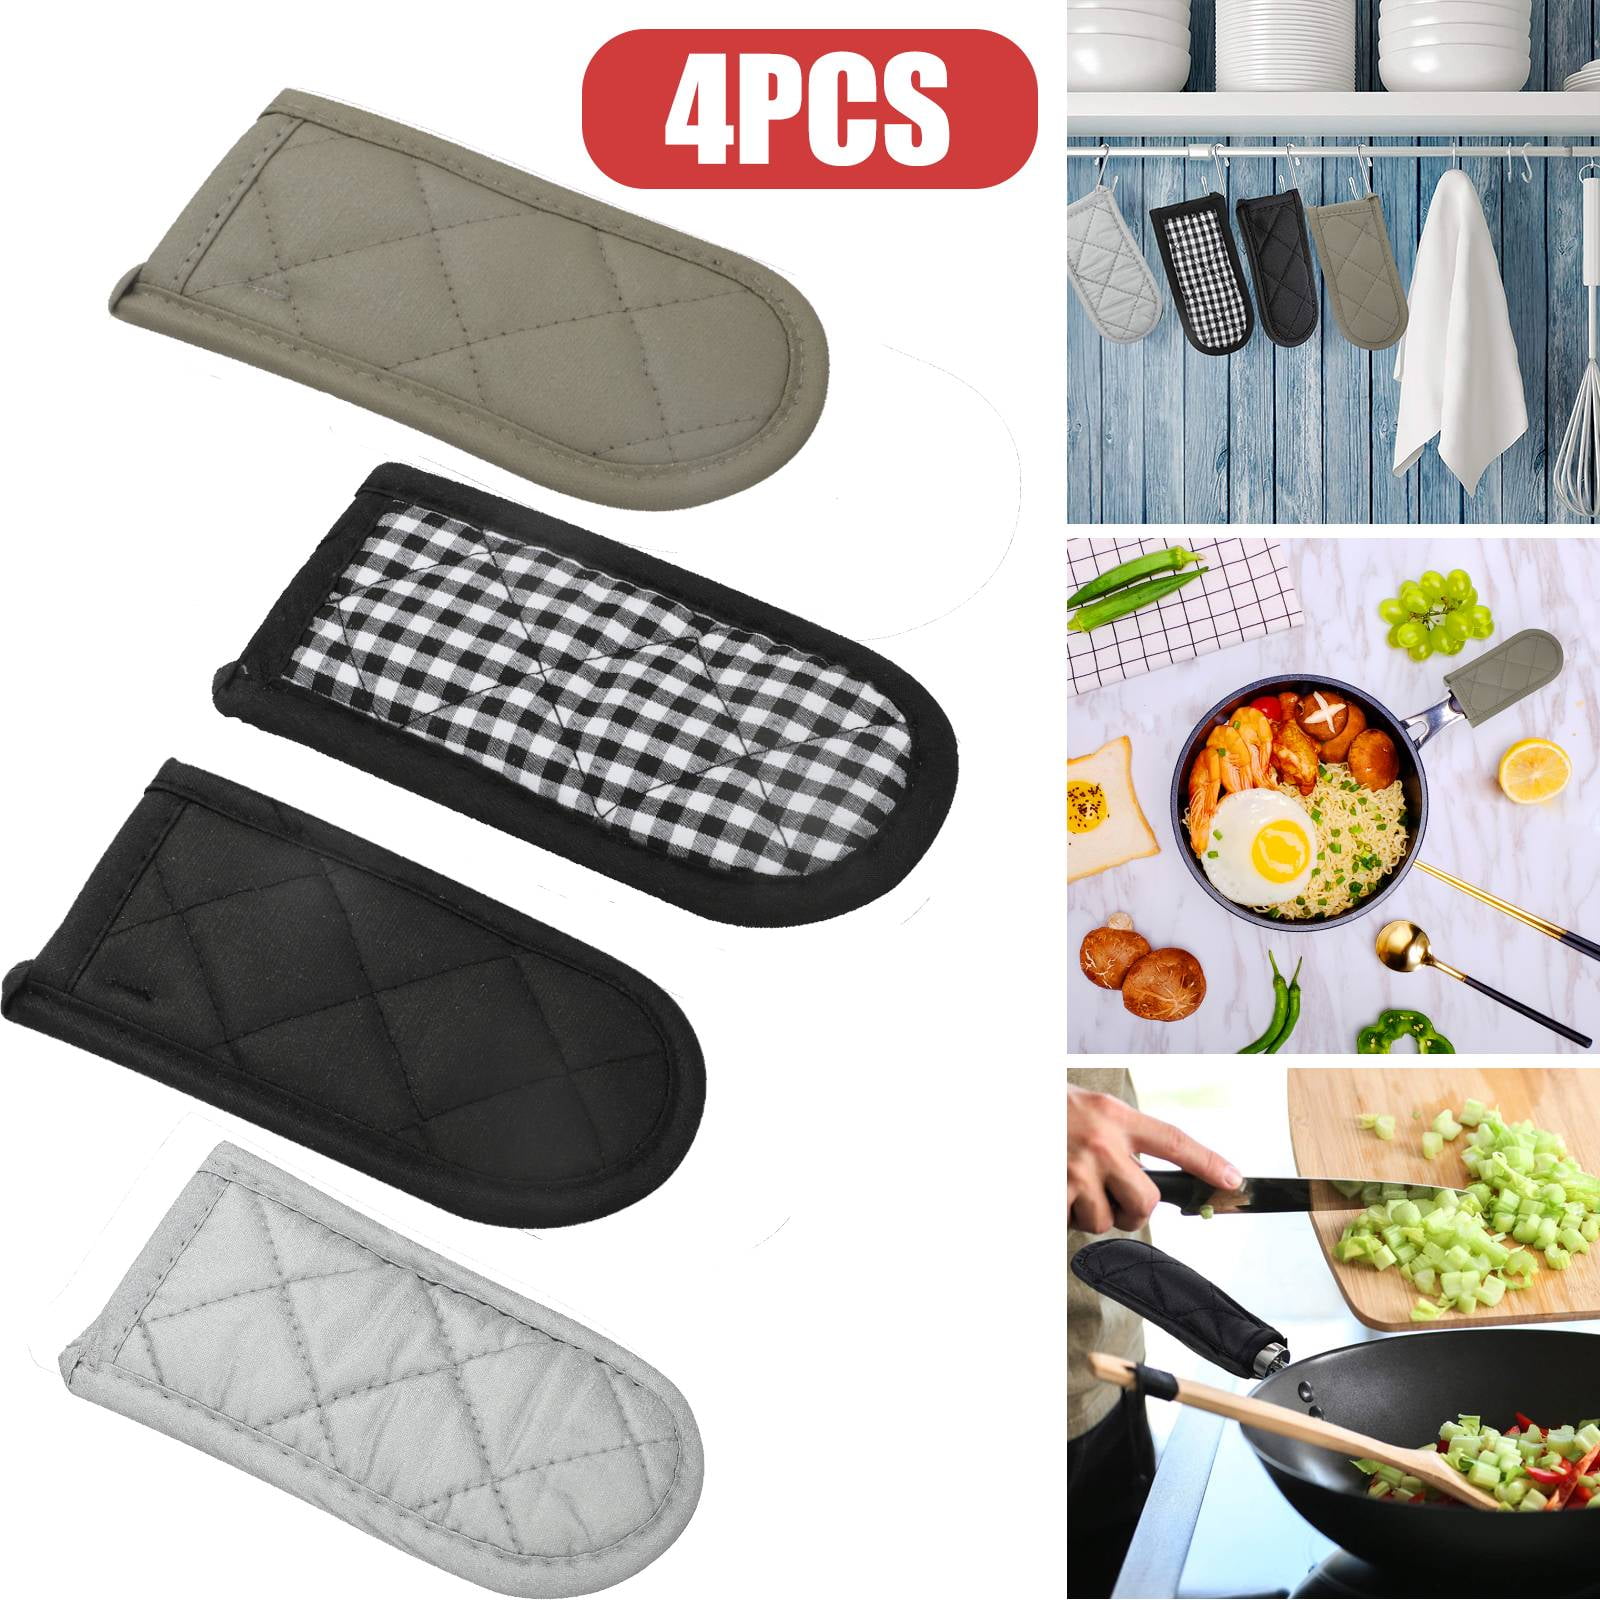 4Pcs Silicone Pot Holder Cast Iron Hot Skillet Handle Cover Pan Sleeves Kitchen 